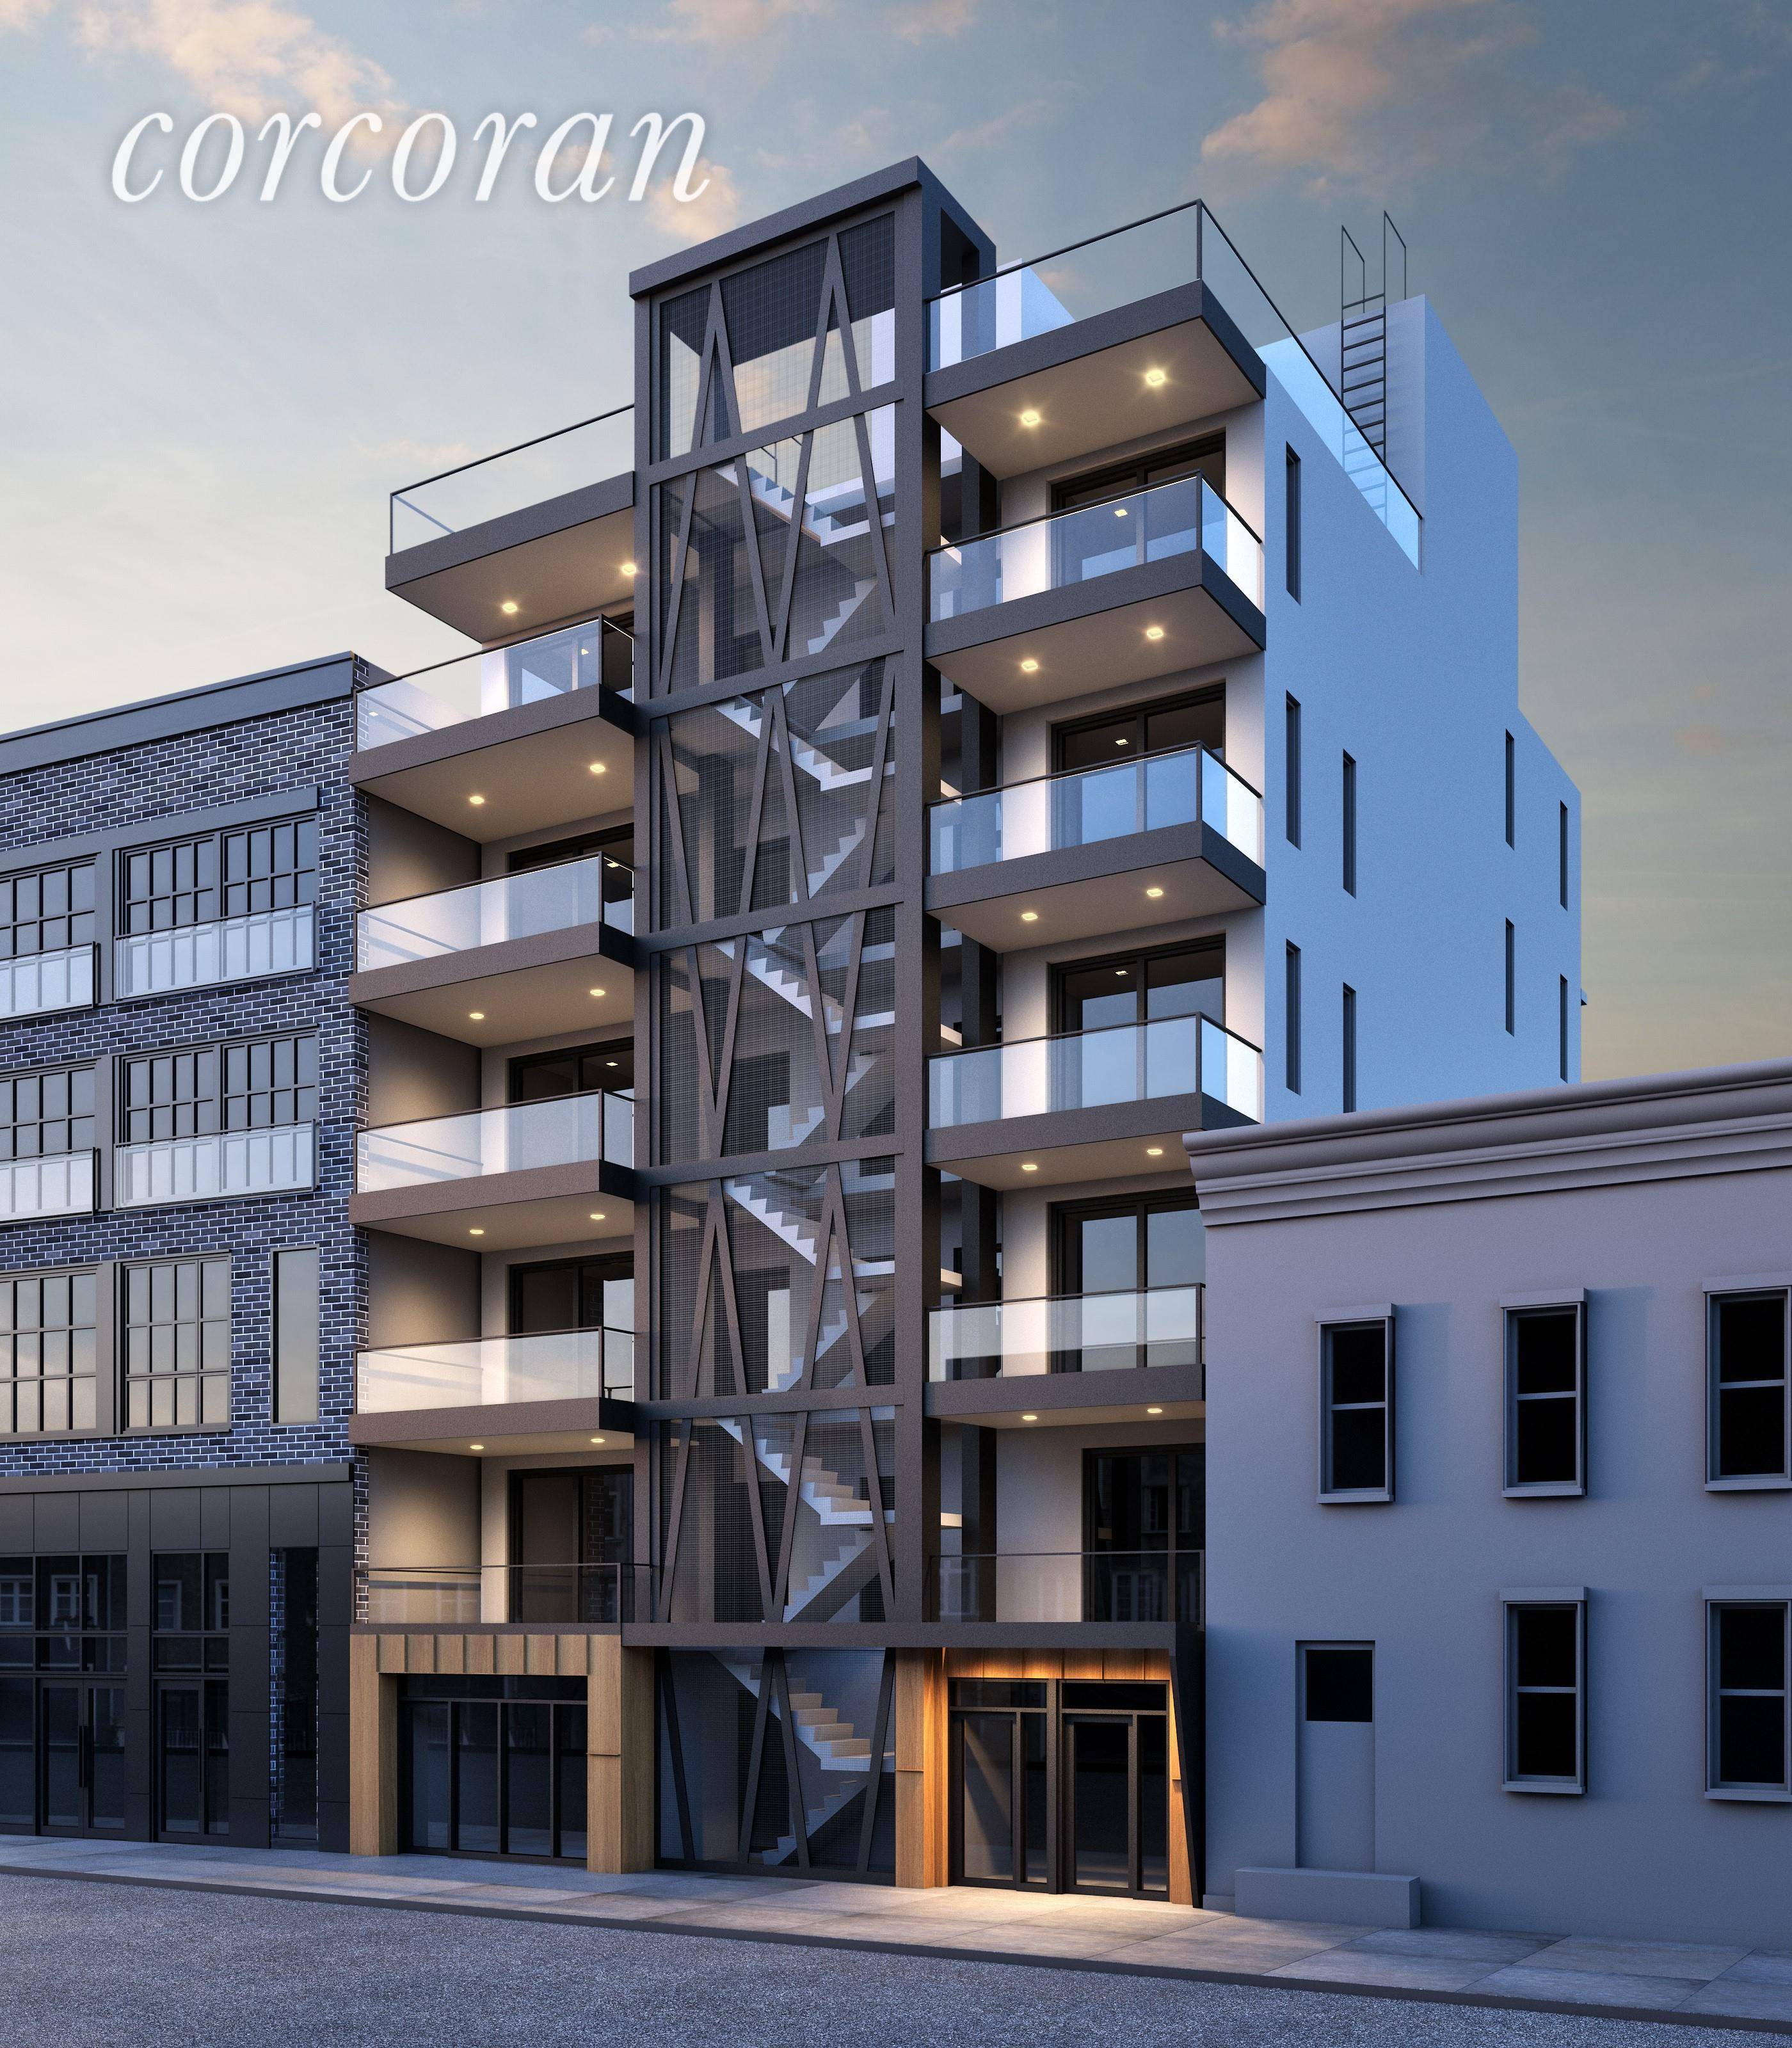 Introducing 340 Metropolitan Avenue, Prime Flagship Residential Mixed Use Development Site with approved plans located in one of North Williamsburgs Highest Priced Residential amp ; Retail Corridors.